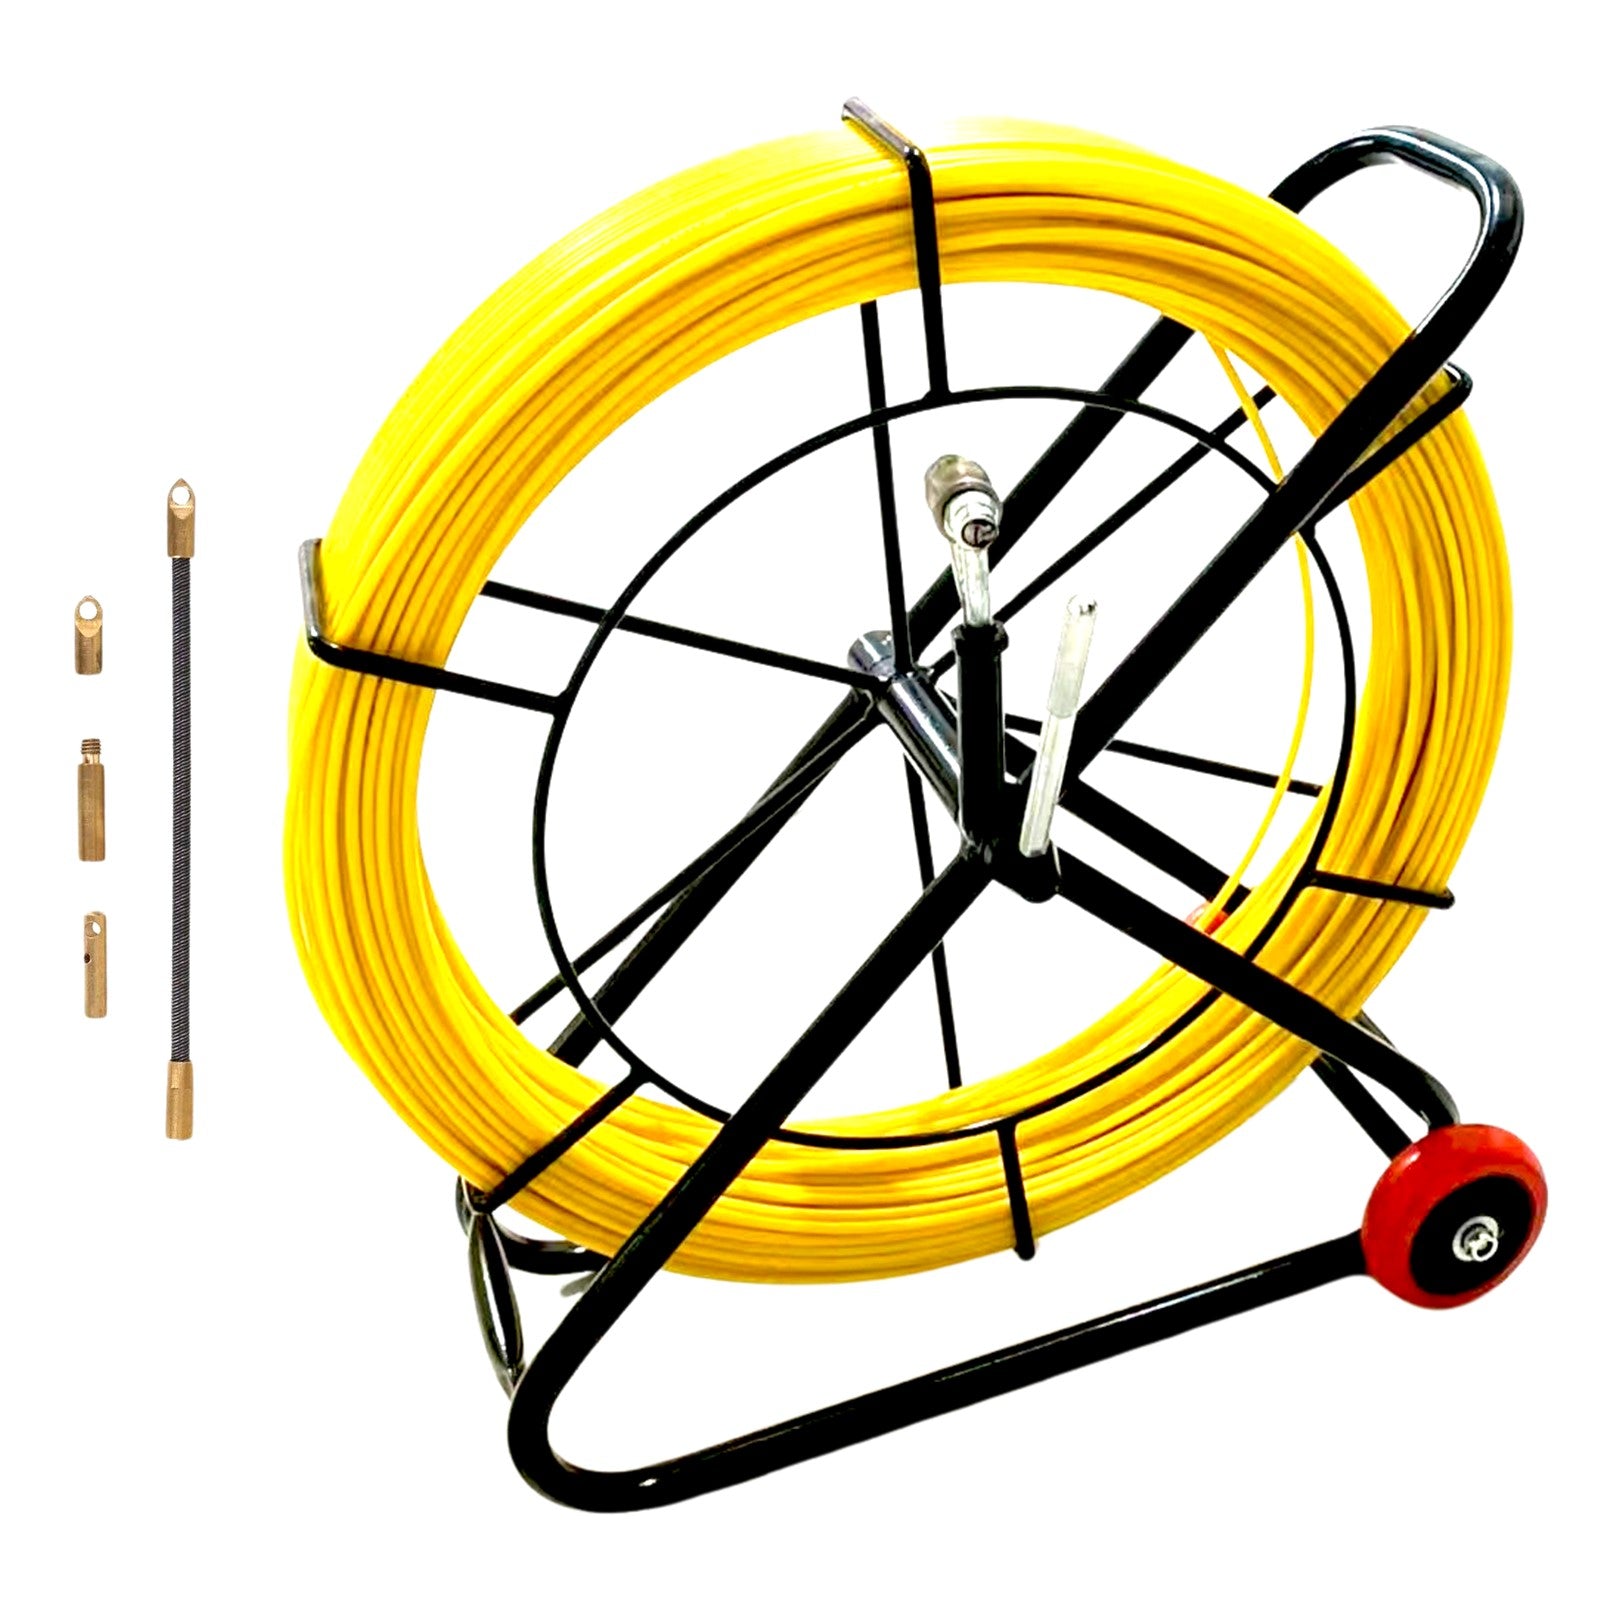 120m x 4.5mm Fibreglass Duct Rodder Cable with Wheeled Steel Frame